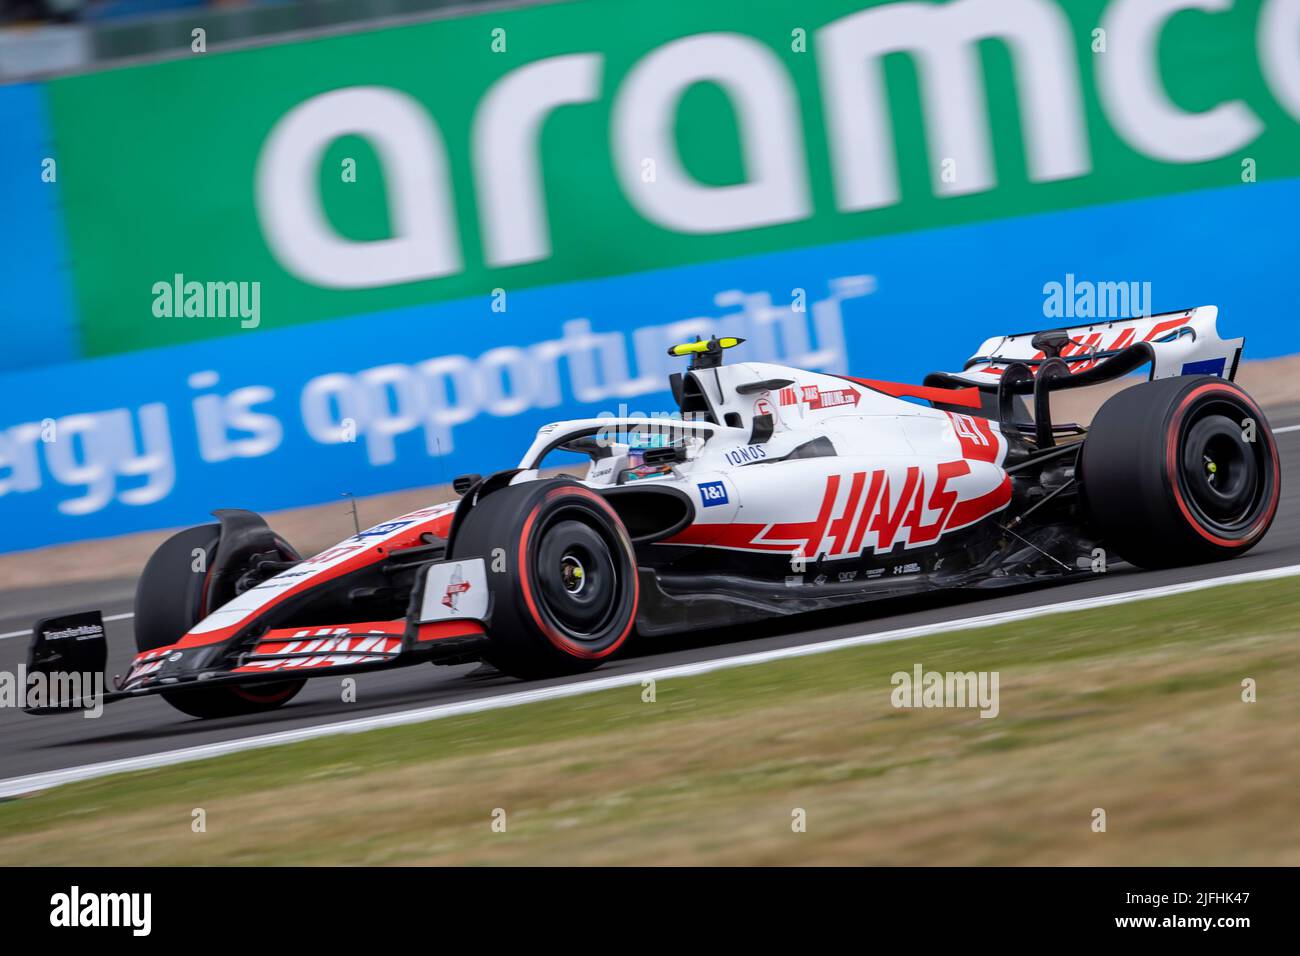 Silverstone, UK. 3rd July 2022,  Silverstone Circuit, Silverstone, Northamptonshire, England: British F1 Grand Prix, Race day: Haas F1 Team driver Mick Schumacher in his Haas-Ferrari VF-22 Credit: Action Plus Sports Images/Alamy Live News Stock Photo